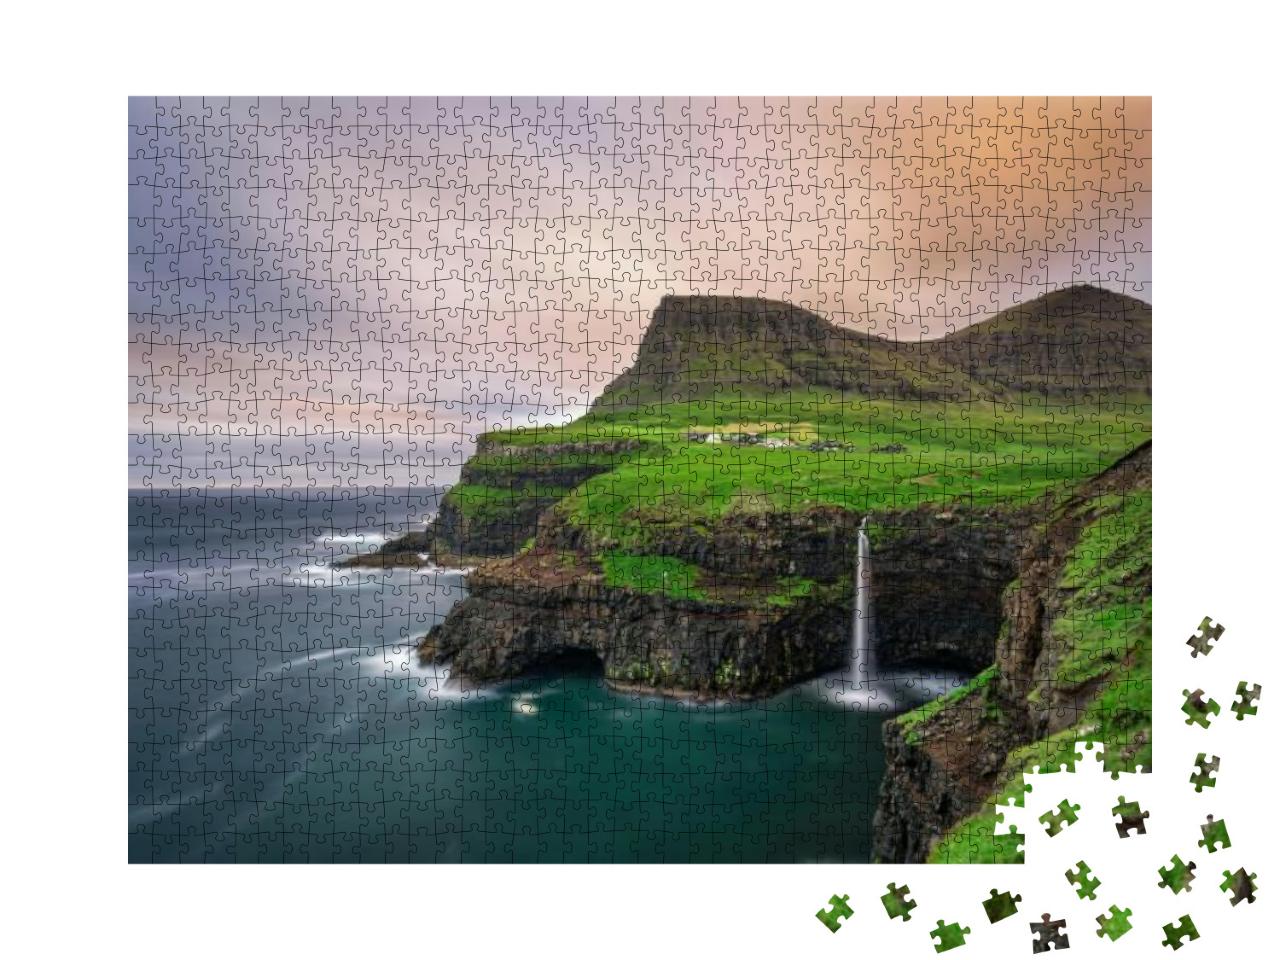 Gasadalur Village & Its Iconic Waterfall, Vagar, Faroe Is... Jigsaw Puzzle with 1000 pieces